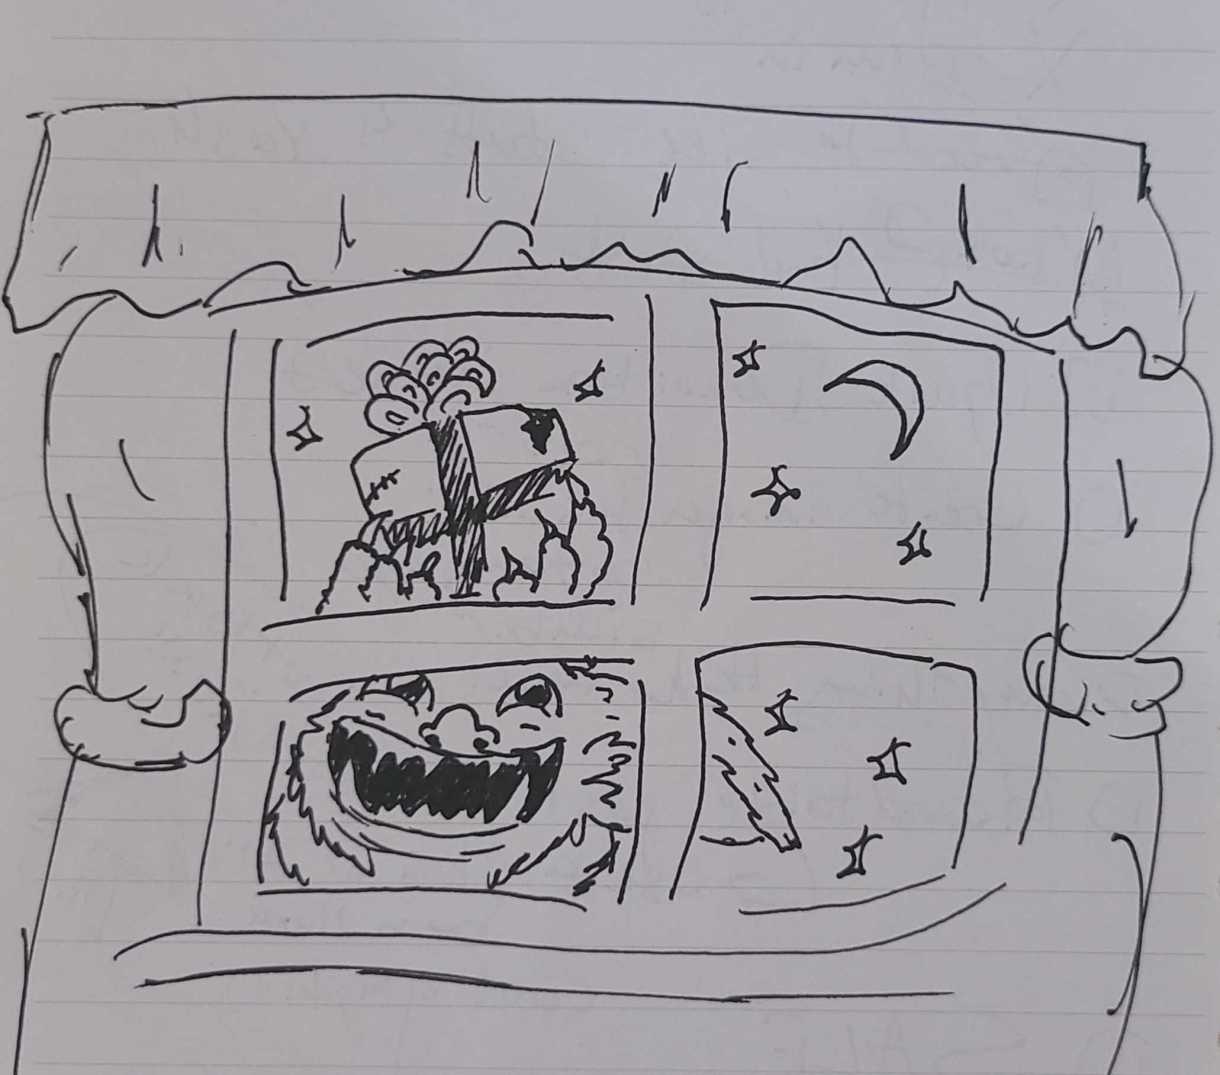 A doodle on lined paper of a bedroom window through which a night sky can be seen, so indicated because of various stars in it. On the other side is a hairy, sharp-toothed, cute and delighted monster who has brought you a gift-wrapped gift!